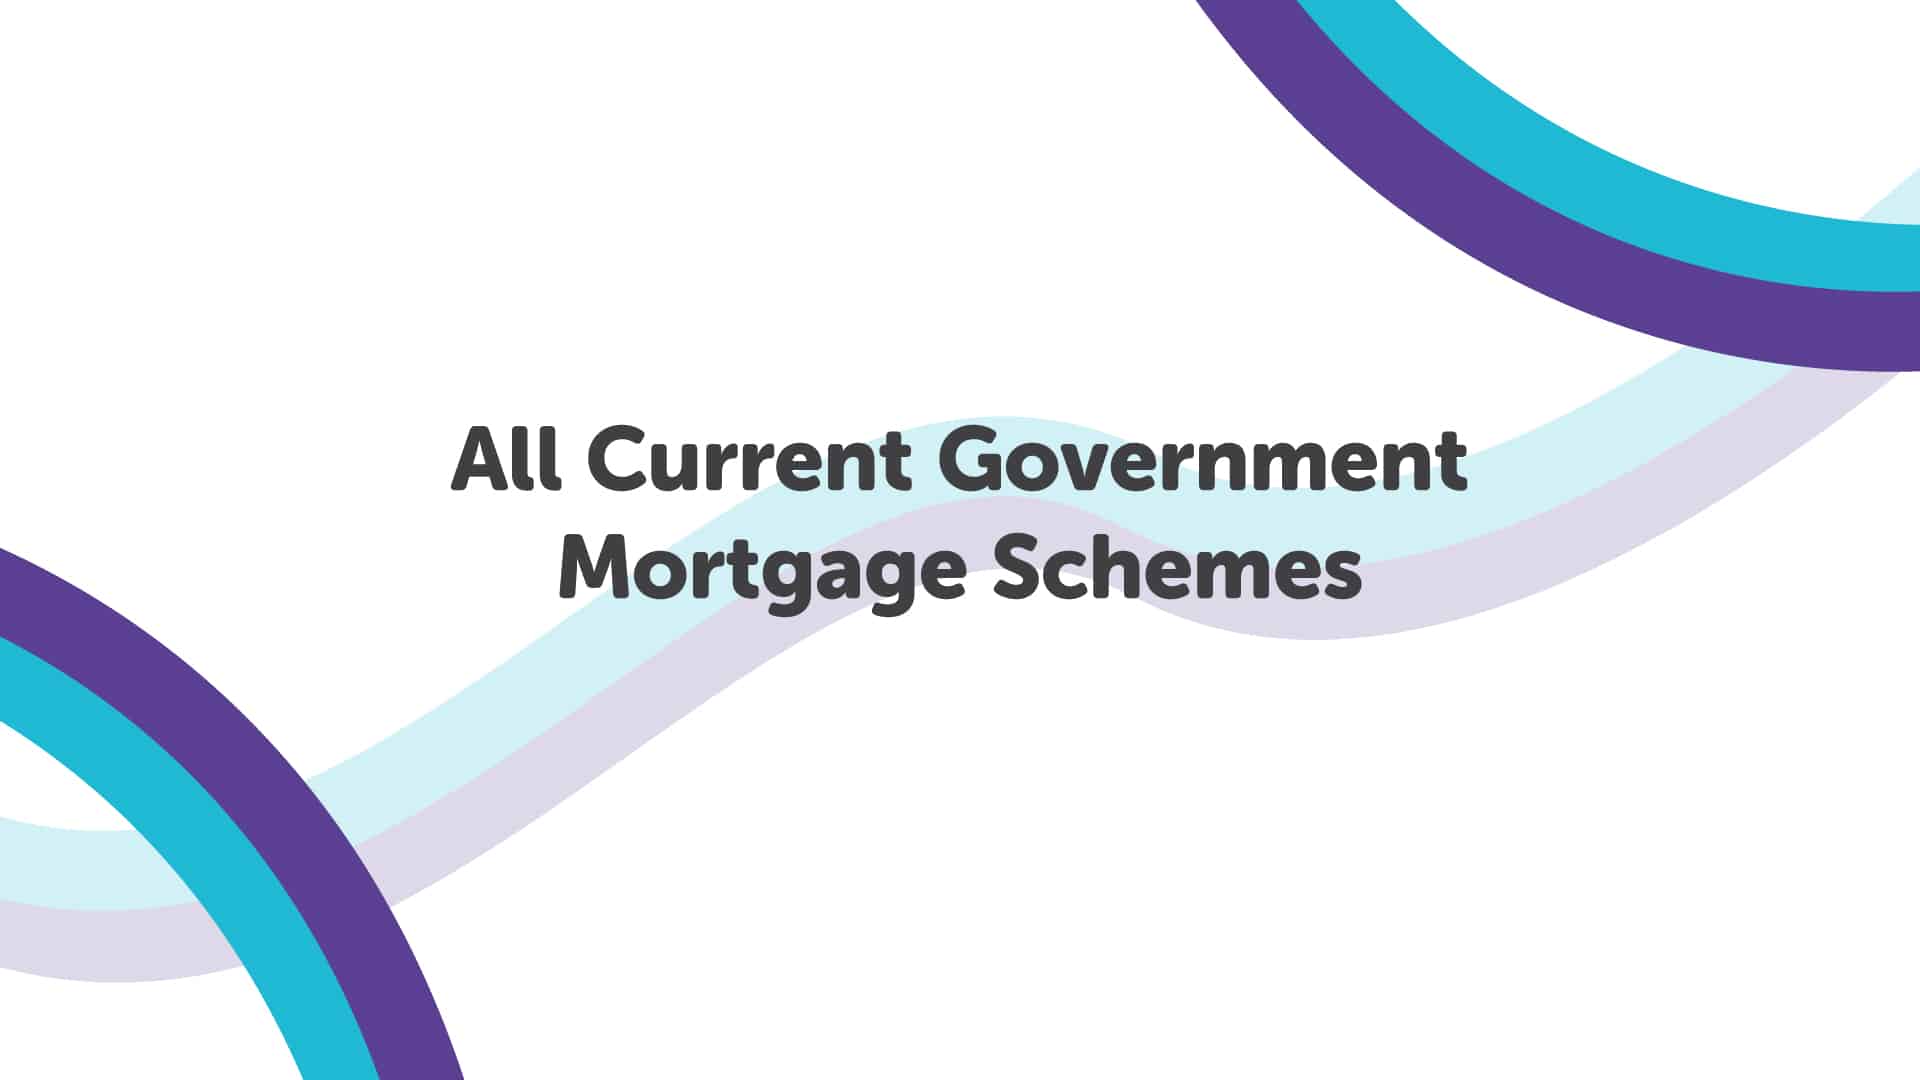 Government Schemes To Help You Onto The Property Ladder